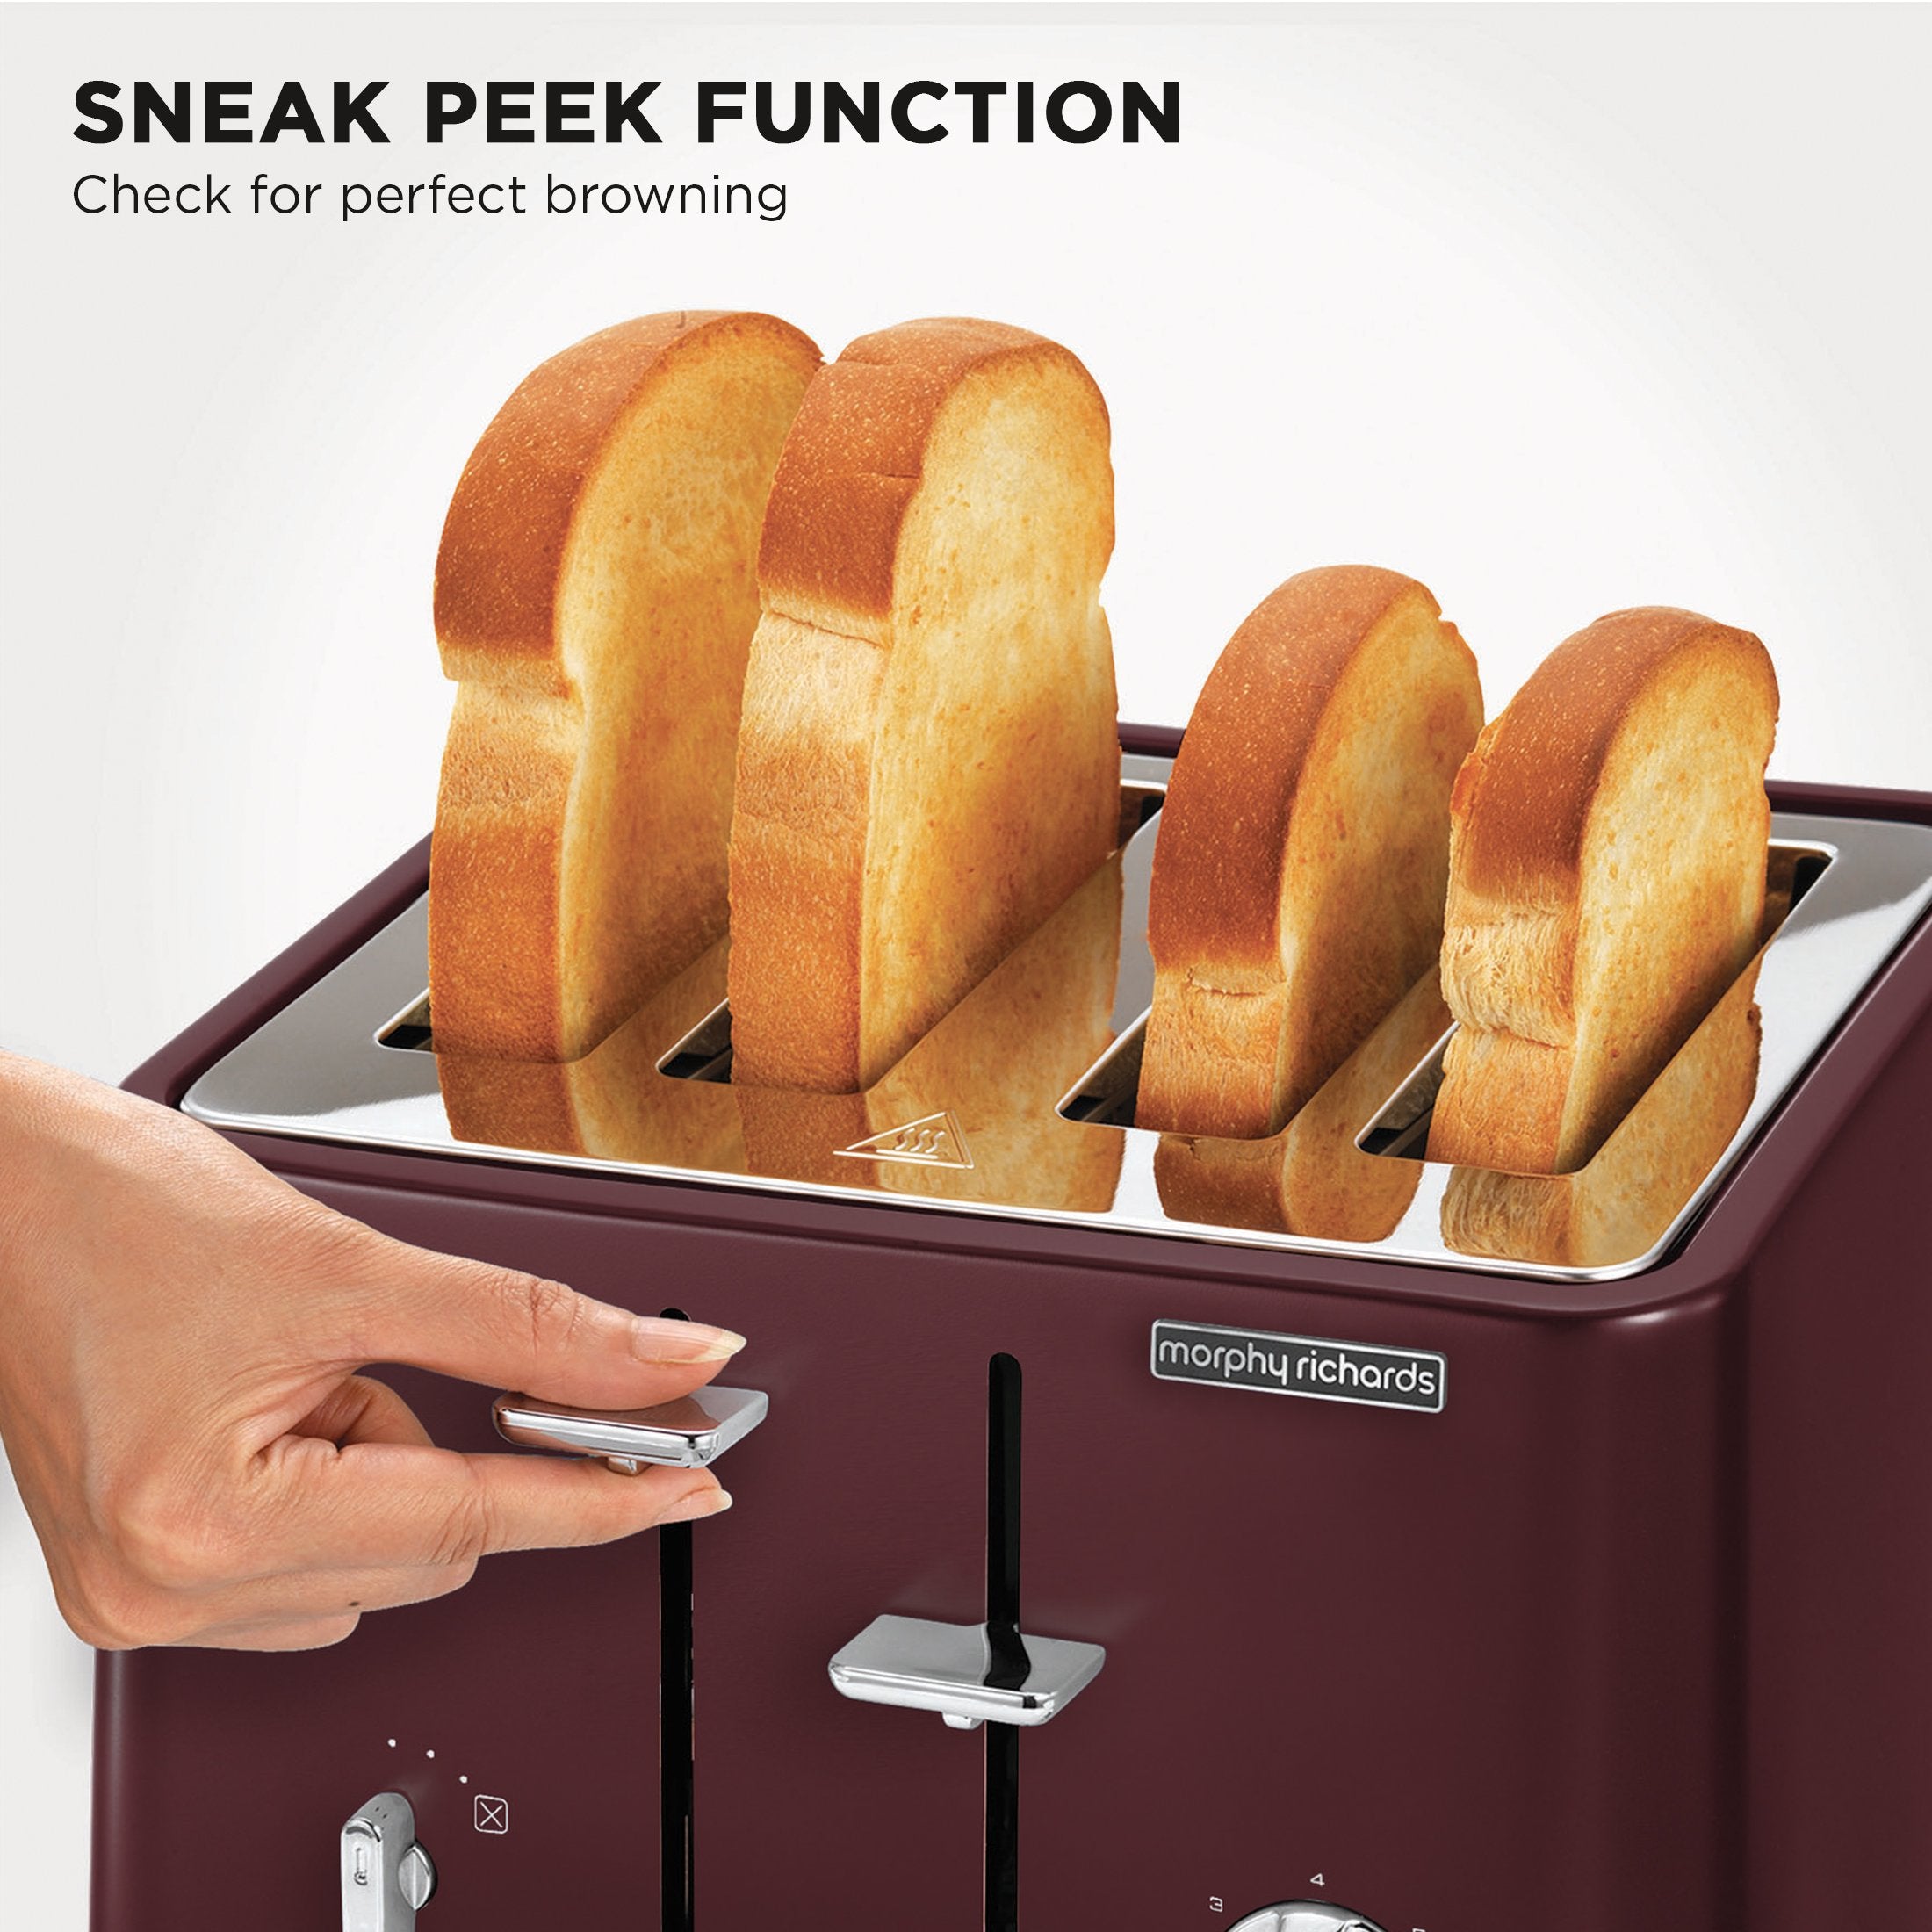 Morphy Richards Aspect 4-Slice Toaster - Maroon with Cork-Effect Trim